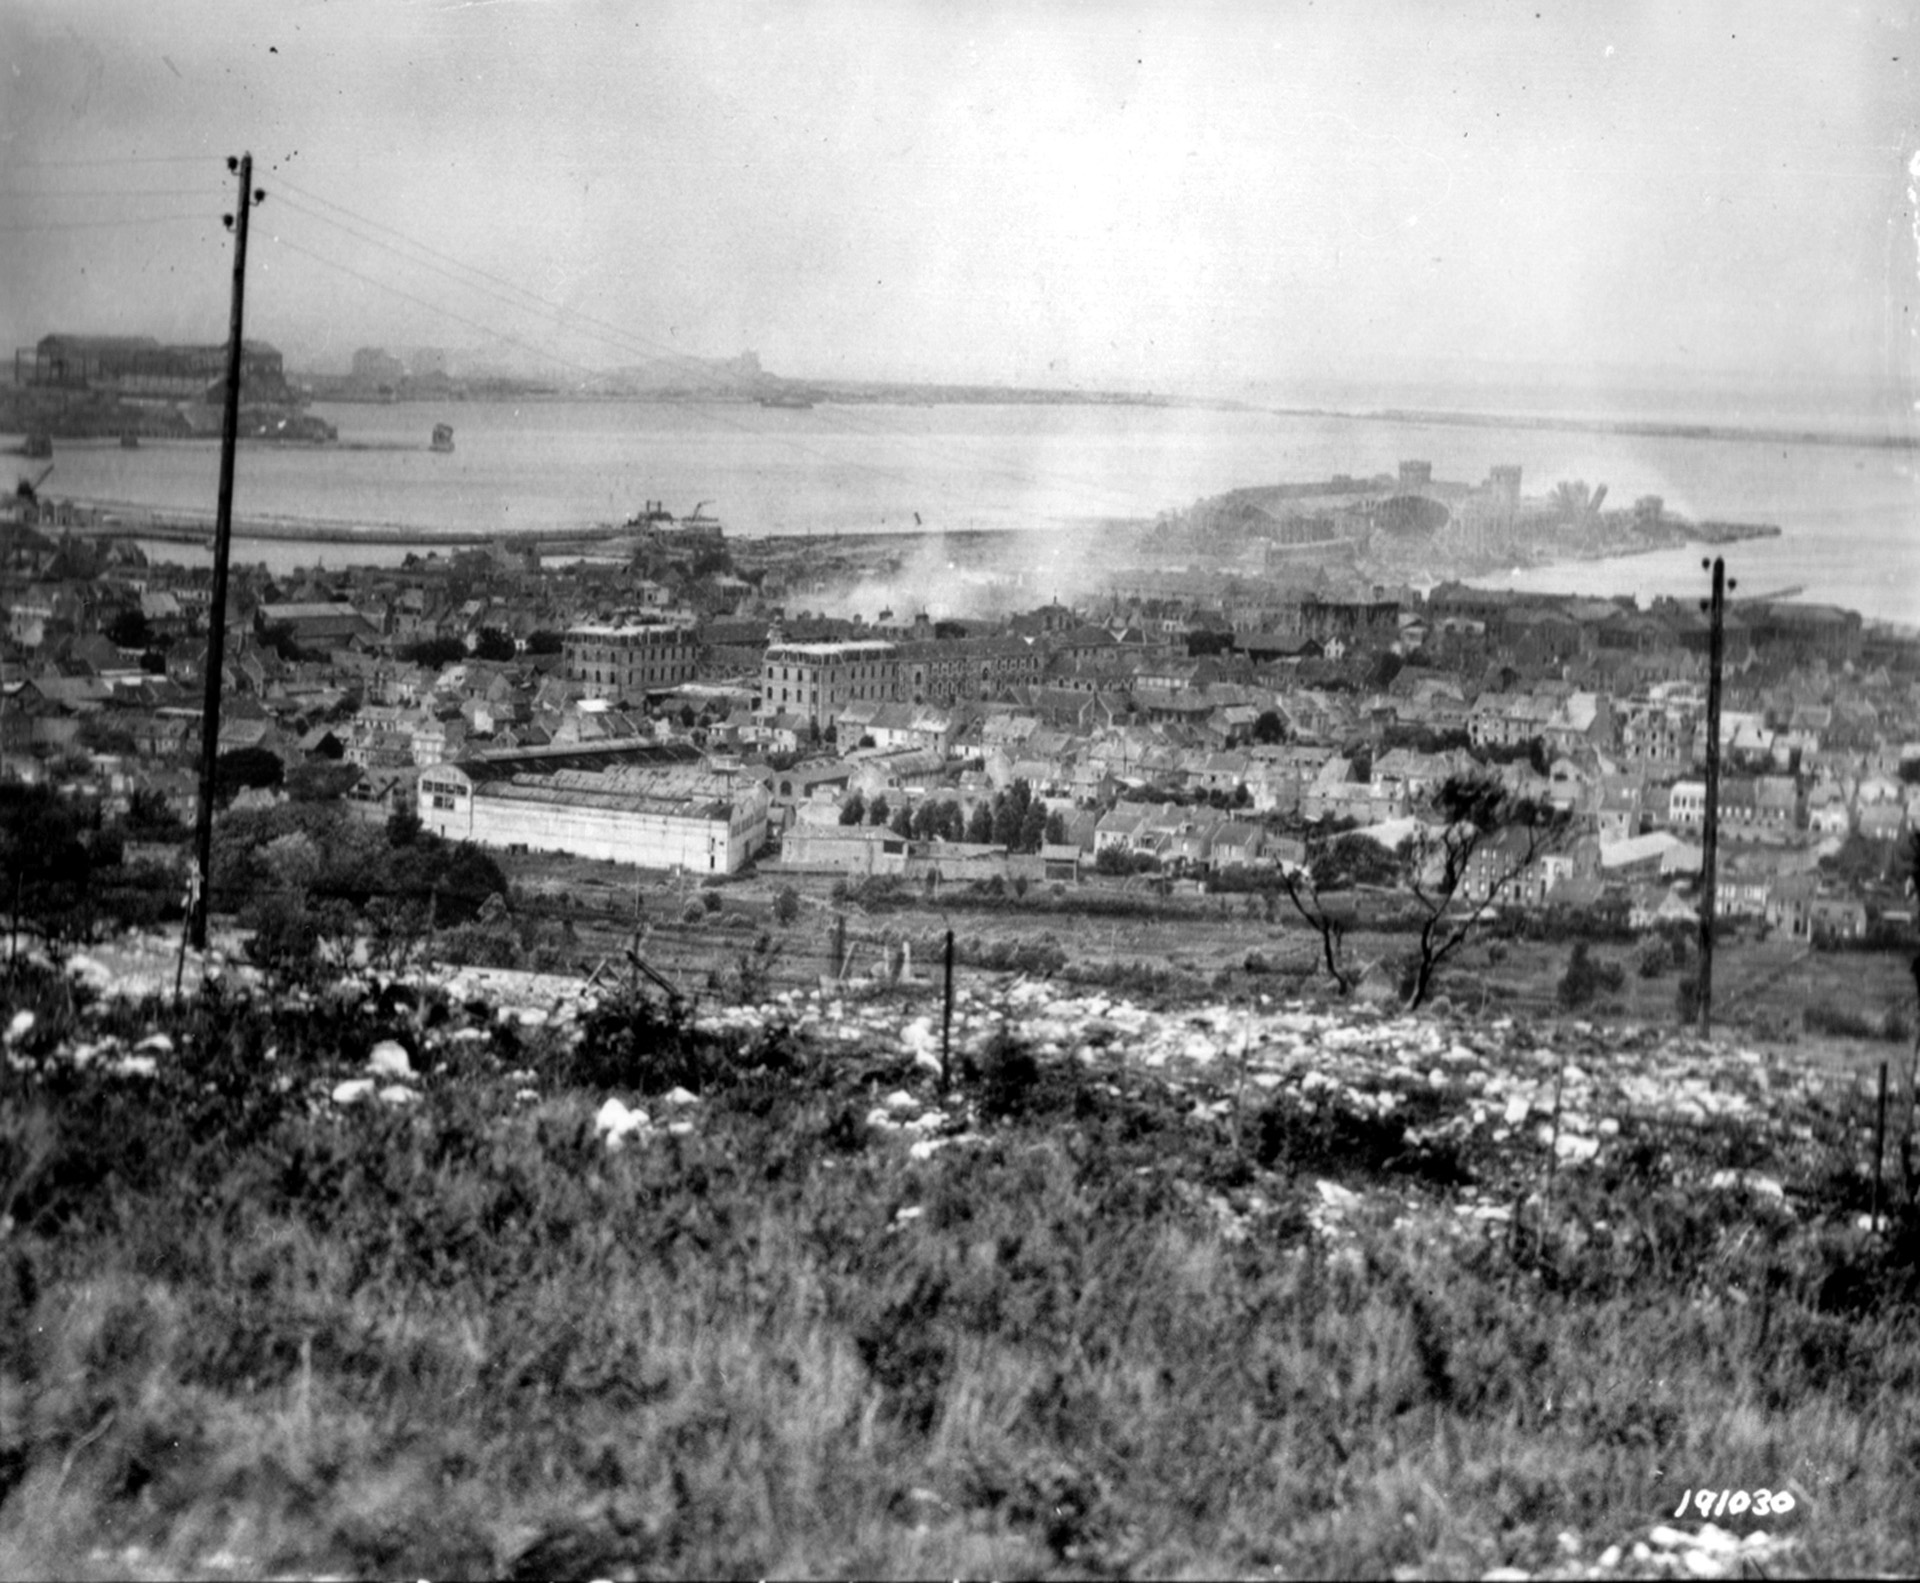 Fort du Roule, a part of the defensive complex occupied by the Germans at Cherbourg, fell to the advancing American soldiers of the 79th Infantry Division on June 26, 1944. In this photo, taken after the fort was captured, the French port city is a smoking ruin with its harbor lying in the distance.